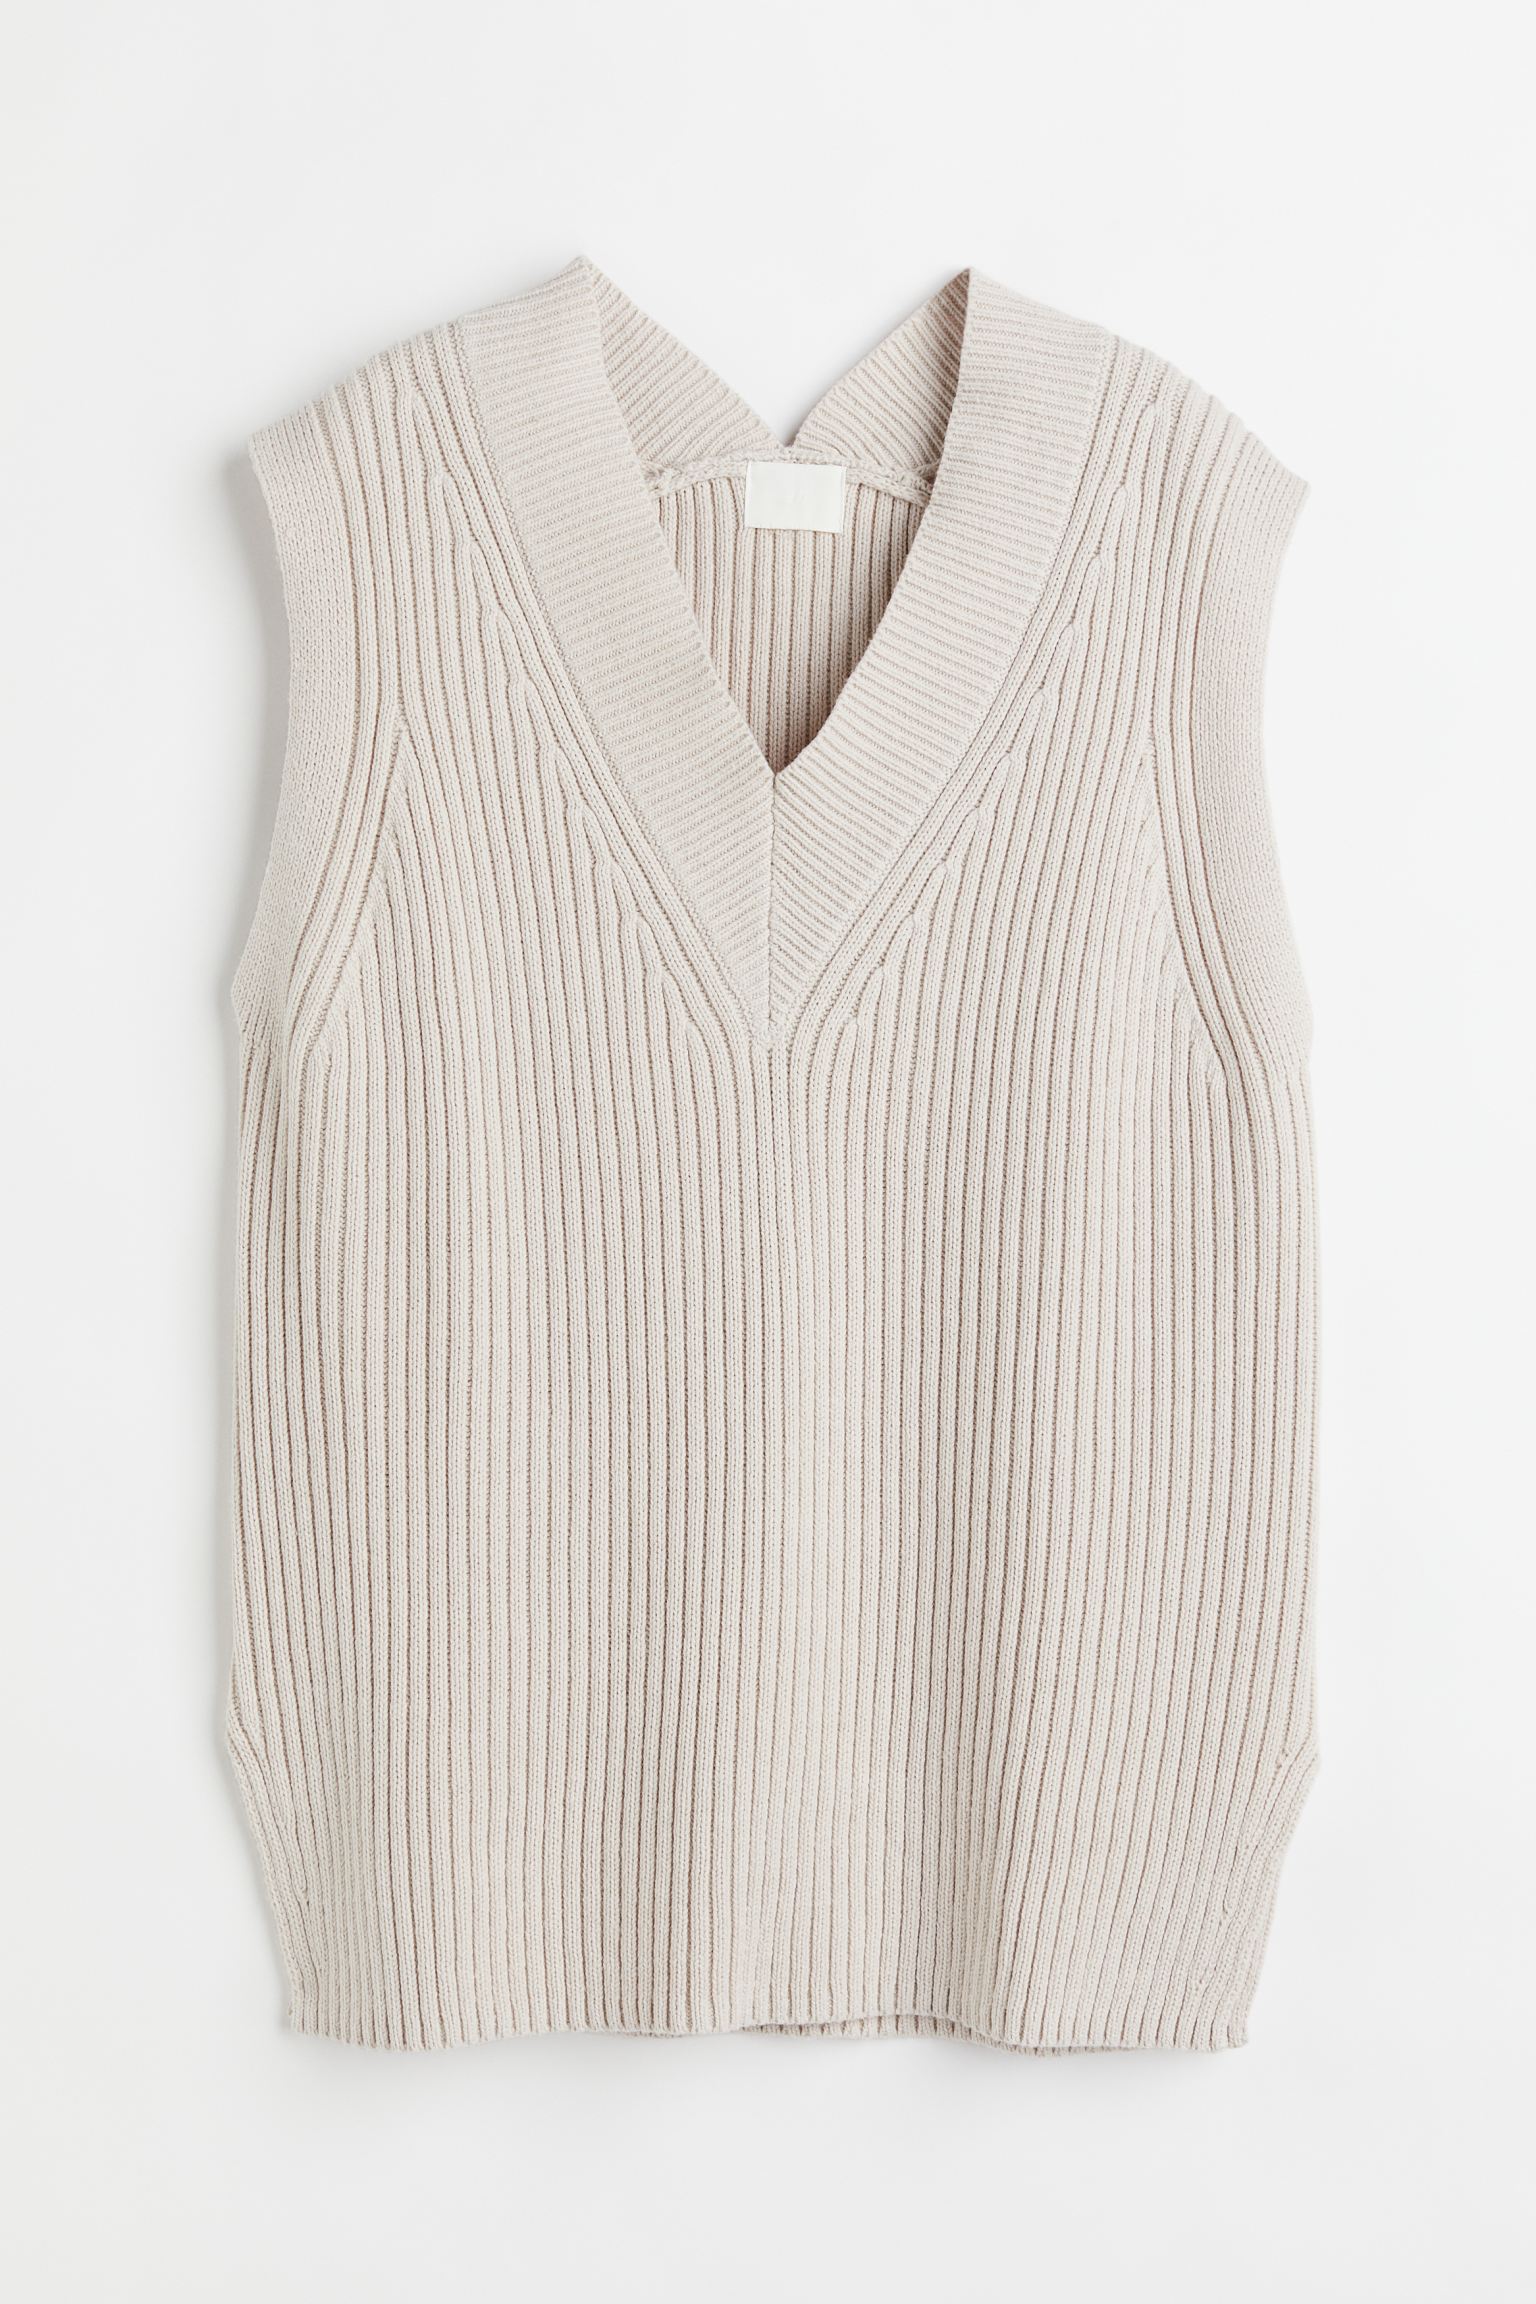 H&M Knitted Sweater Vest